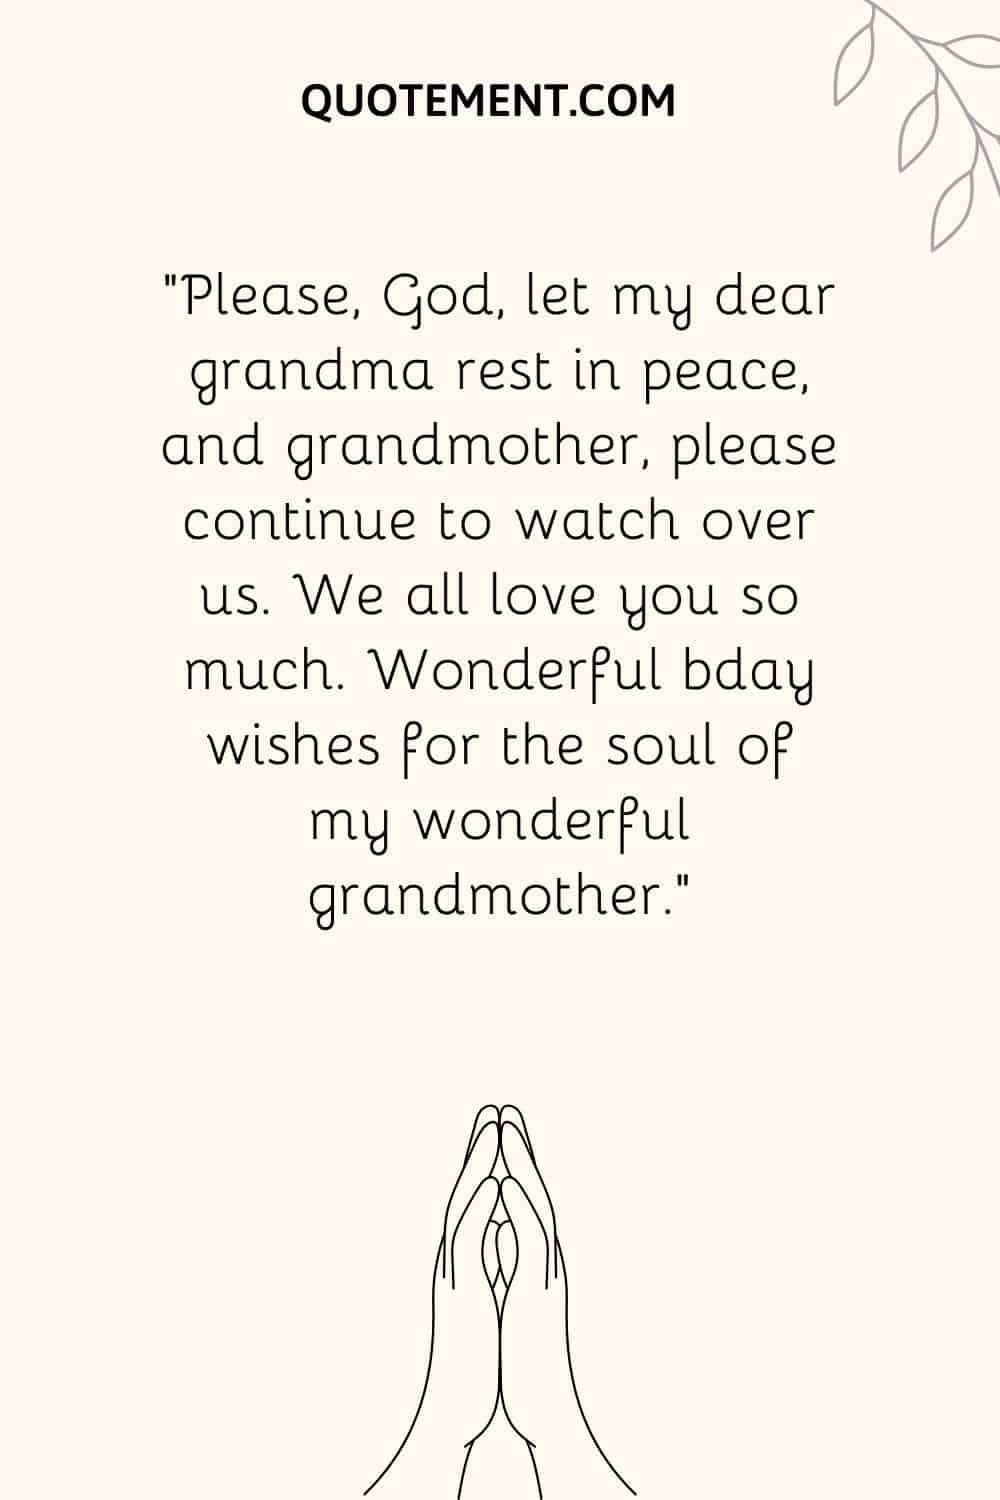 “Please, God, let my dear grandma rest in peace, and grandmother, please continue to watch over us.